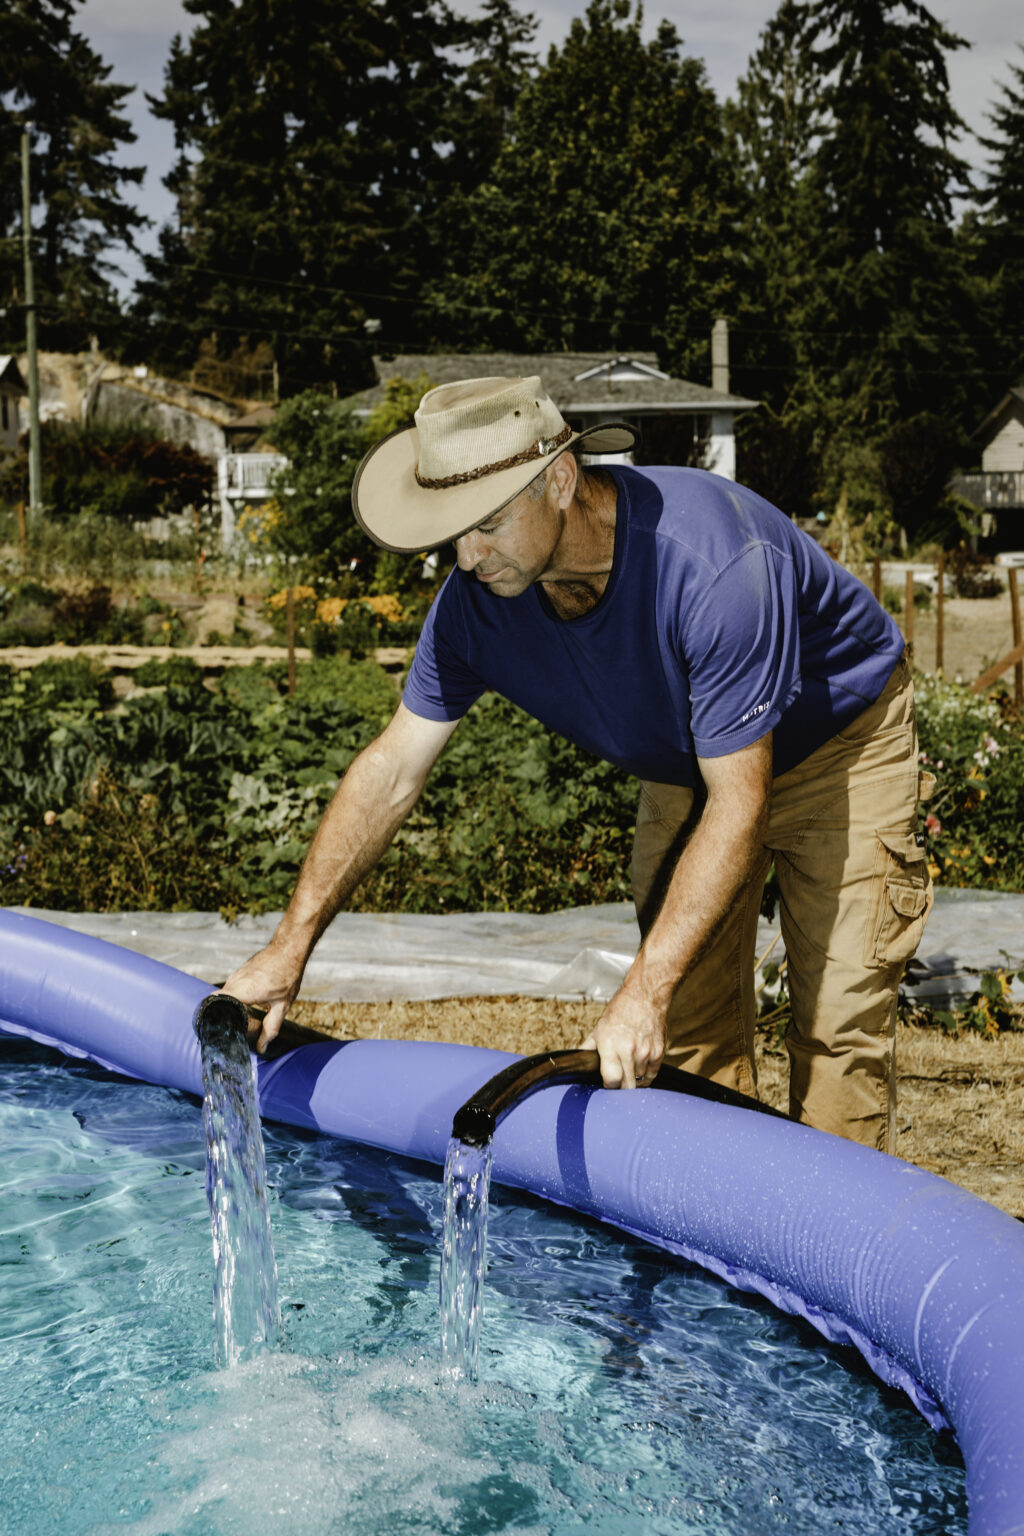 Paul Nash from Ruby’s Run urban farm in Sechelt uses a children’s pool with water in an act of improvised storage.